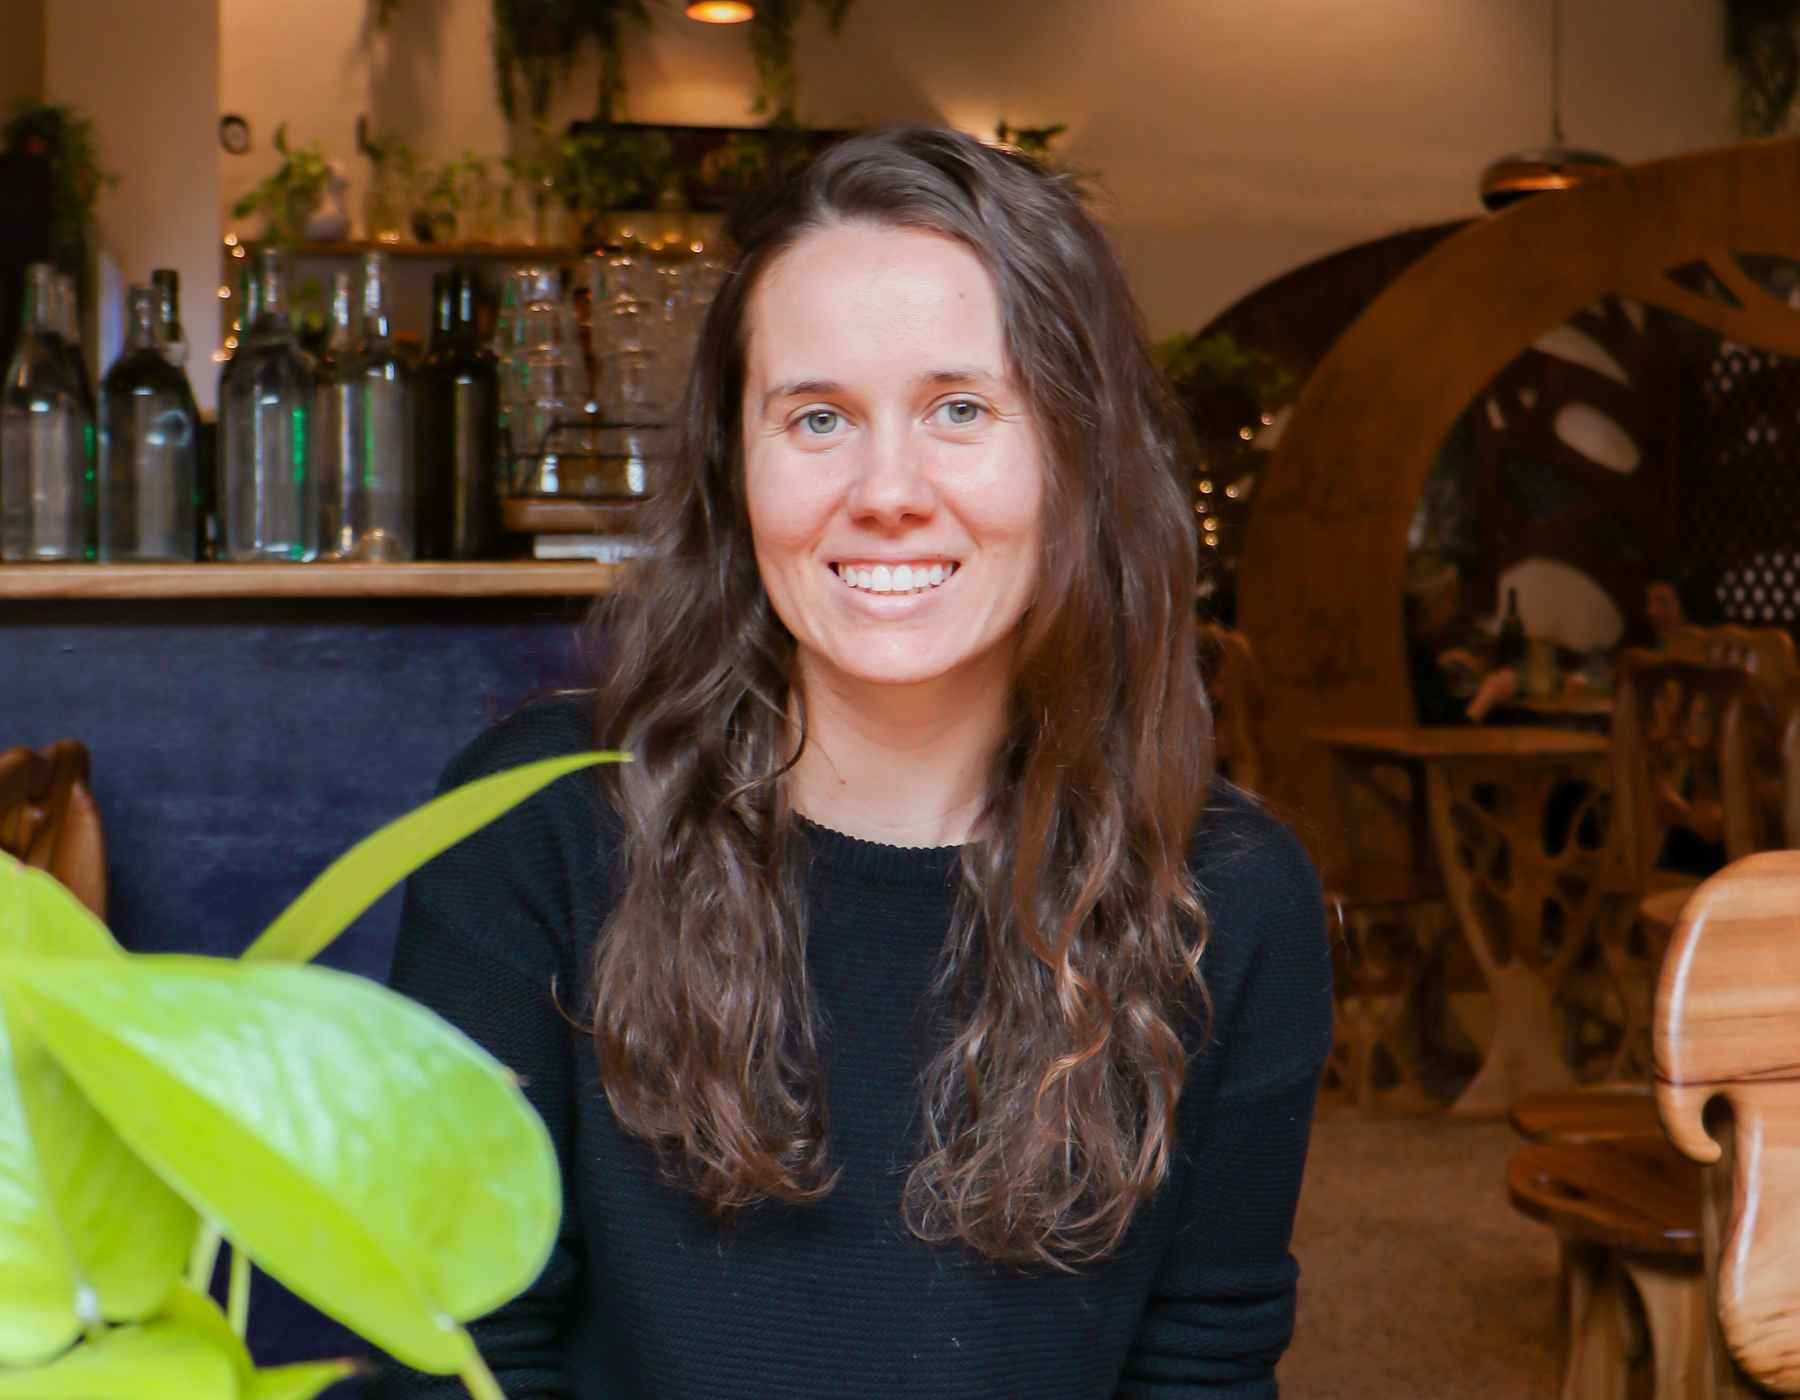 Interview: Sarah Hutto on sustainability, positive change and papaya